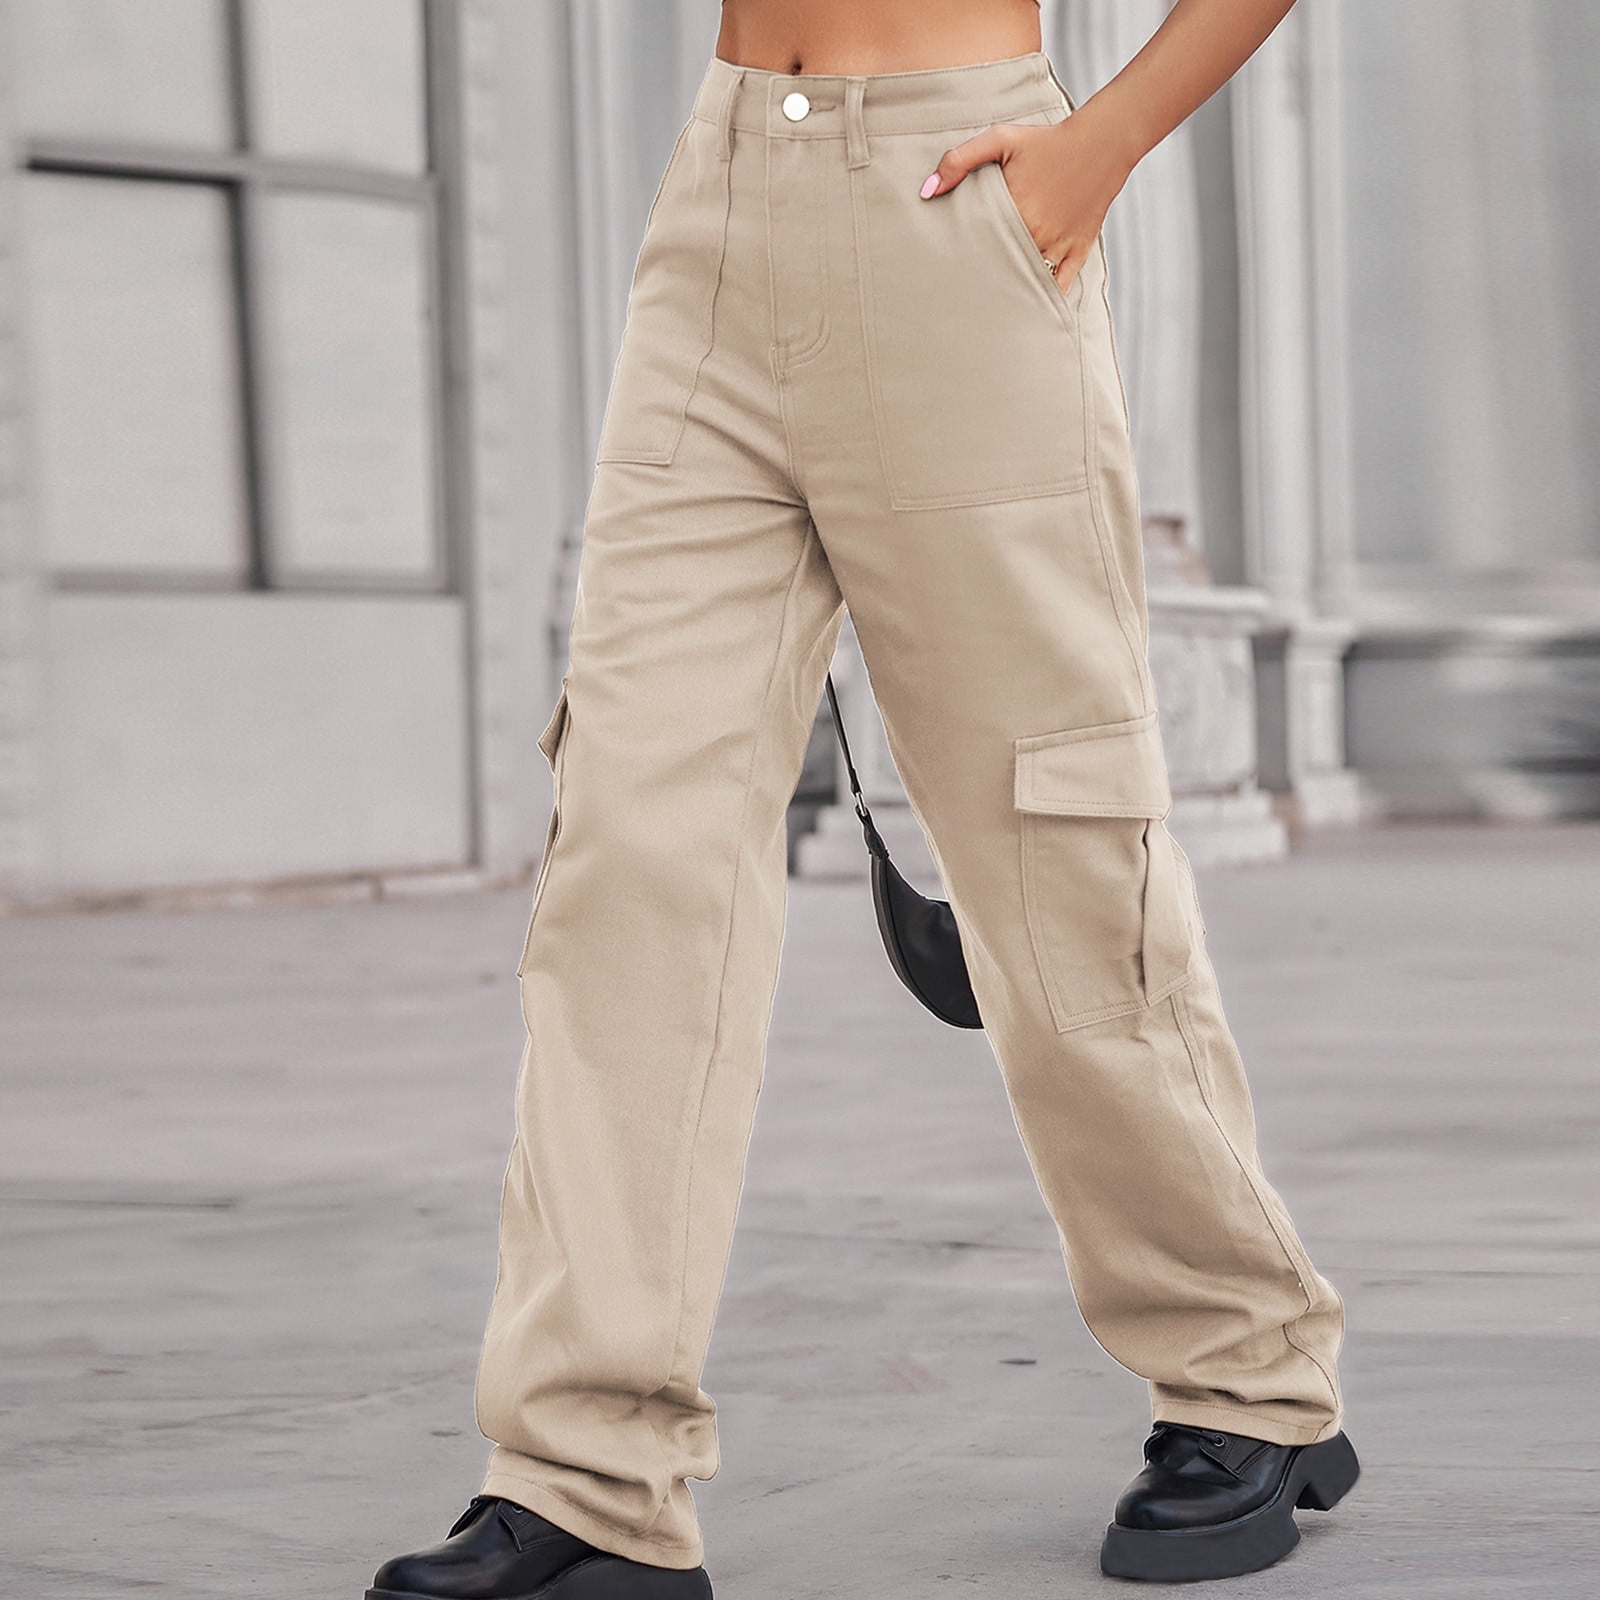 Tdoqot Women's Cargo Pants- Fashion with Pockets High weight